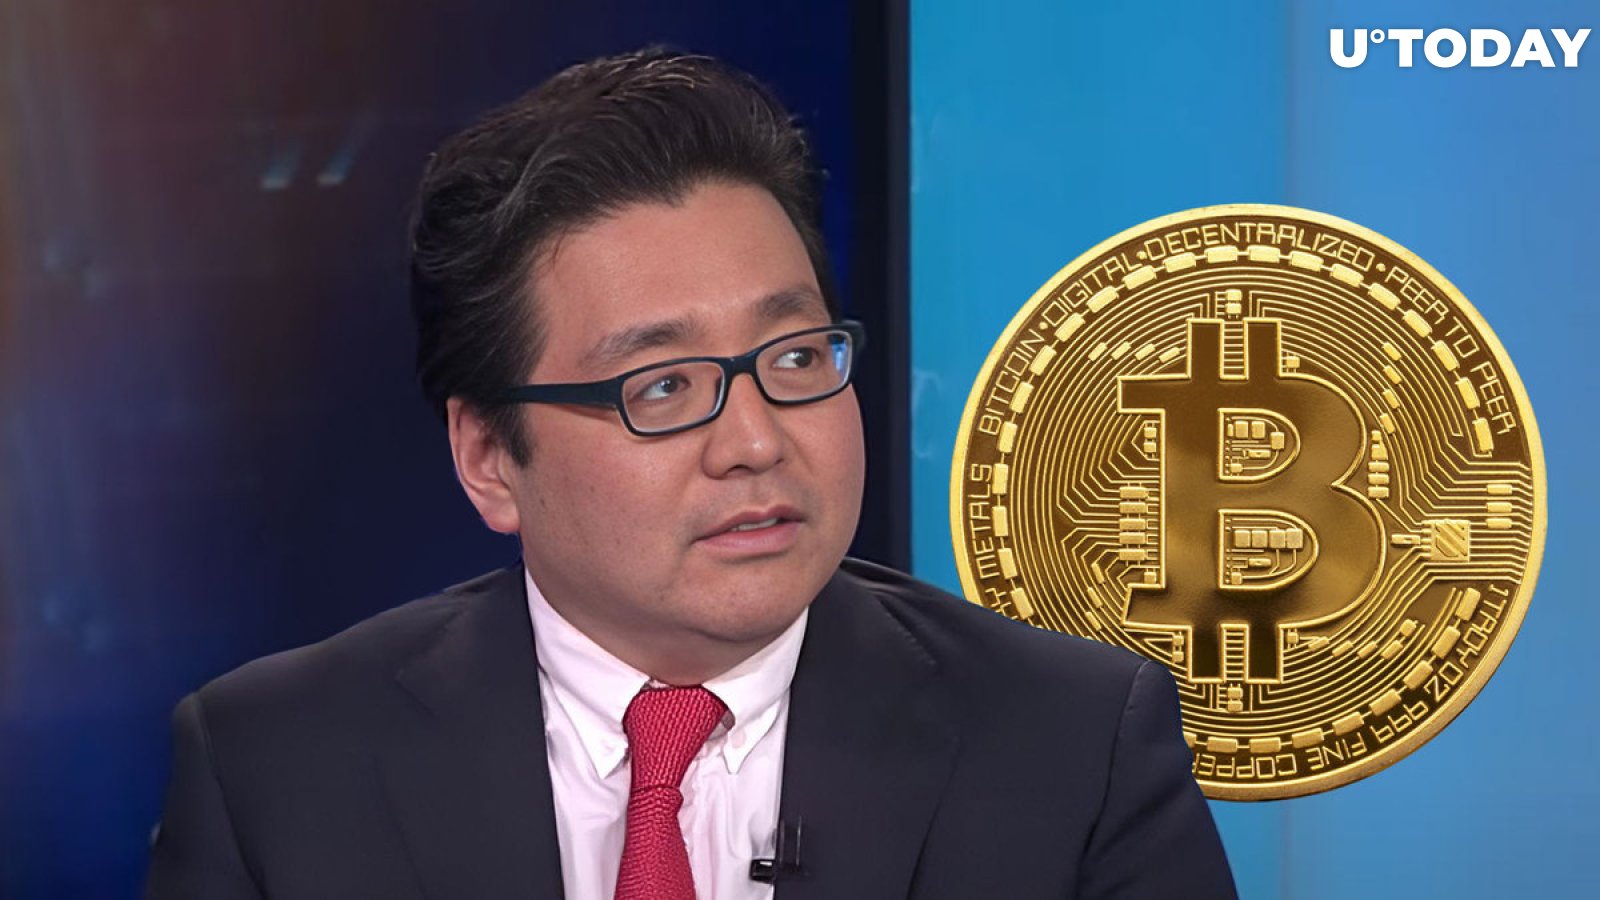 Tom Lee Reveals Rationale Behind Bitcoin Price Predictions